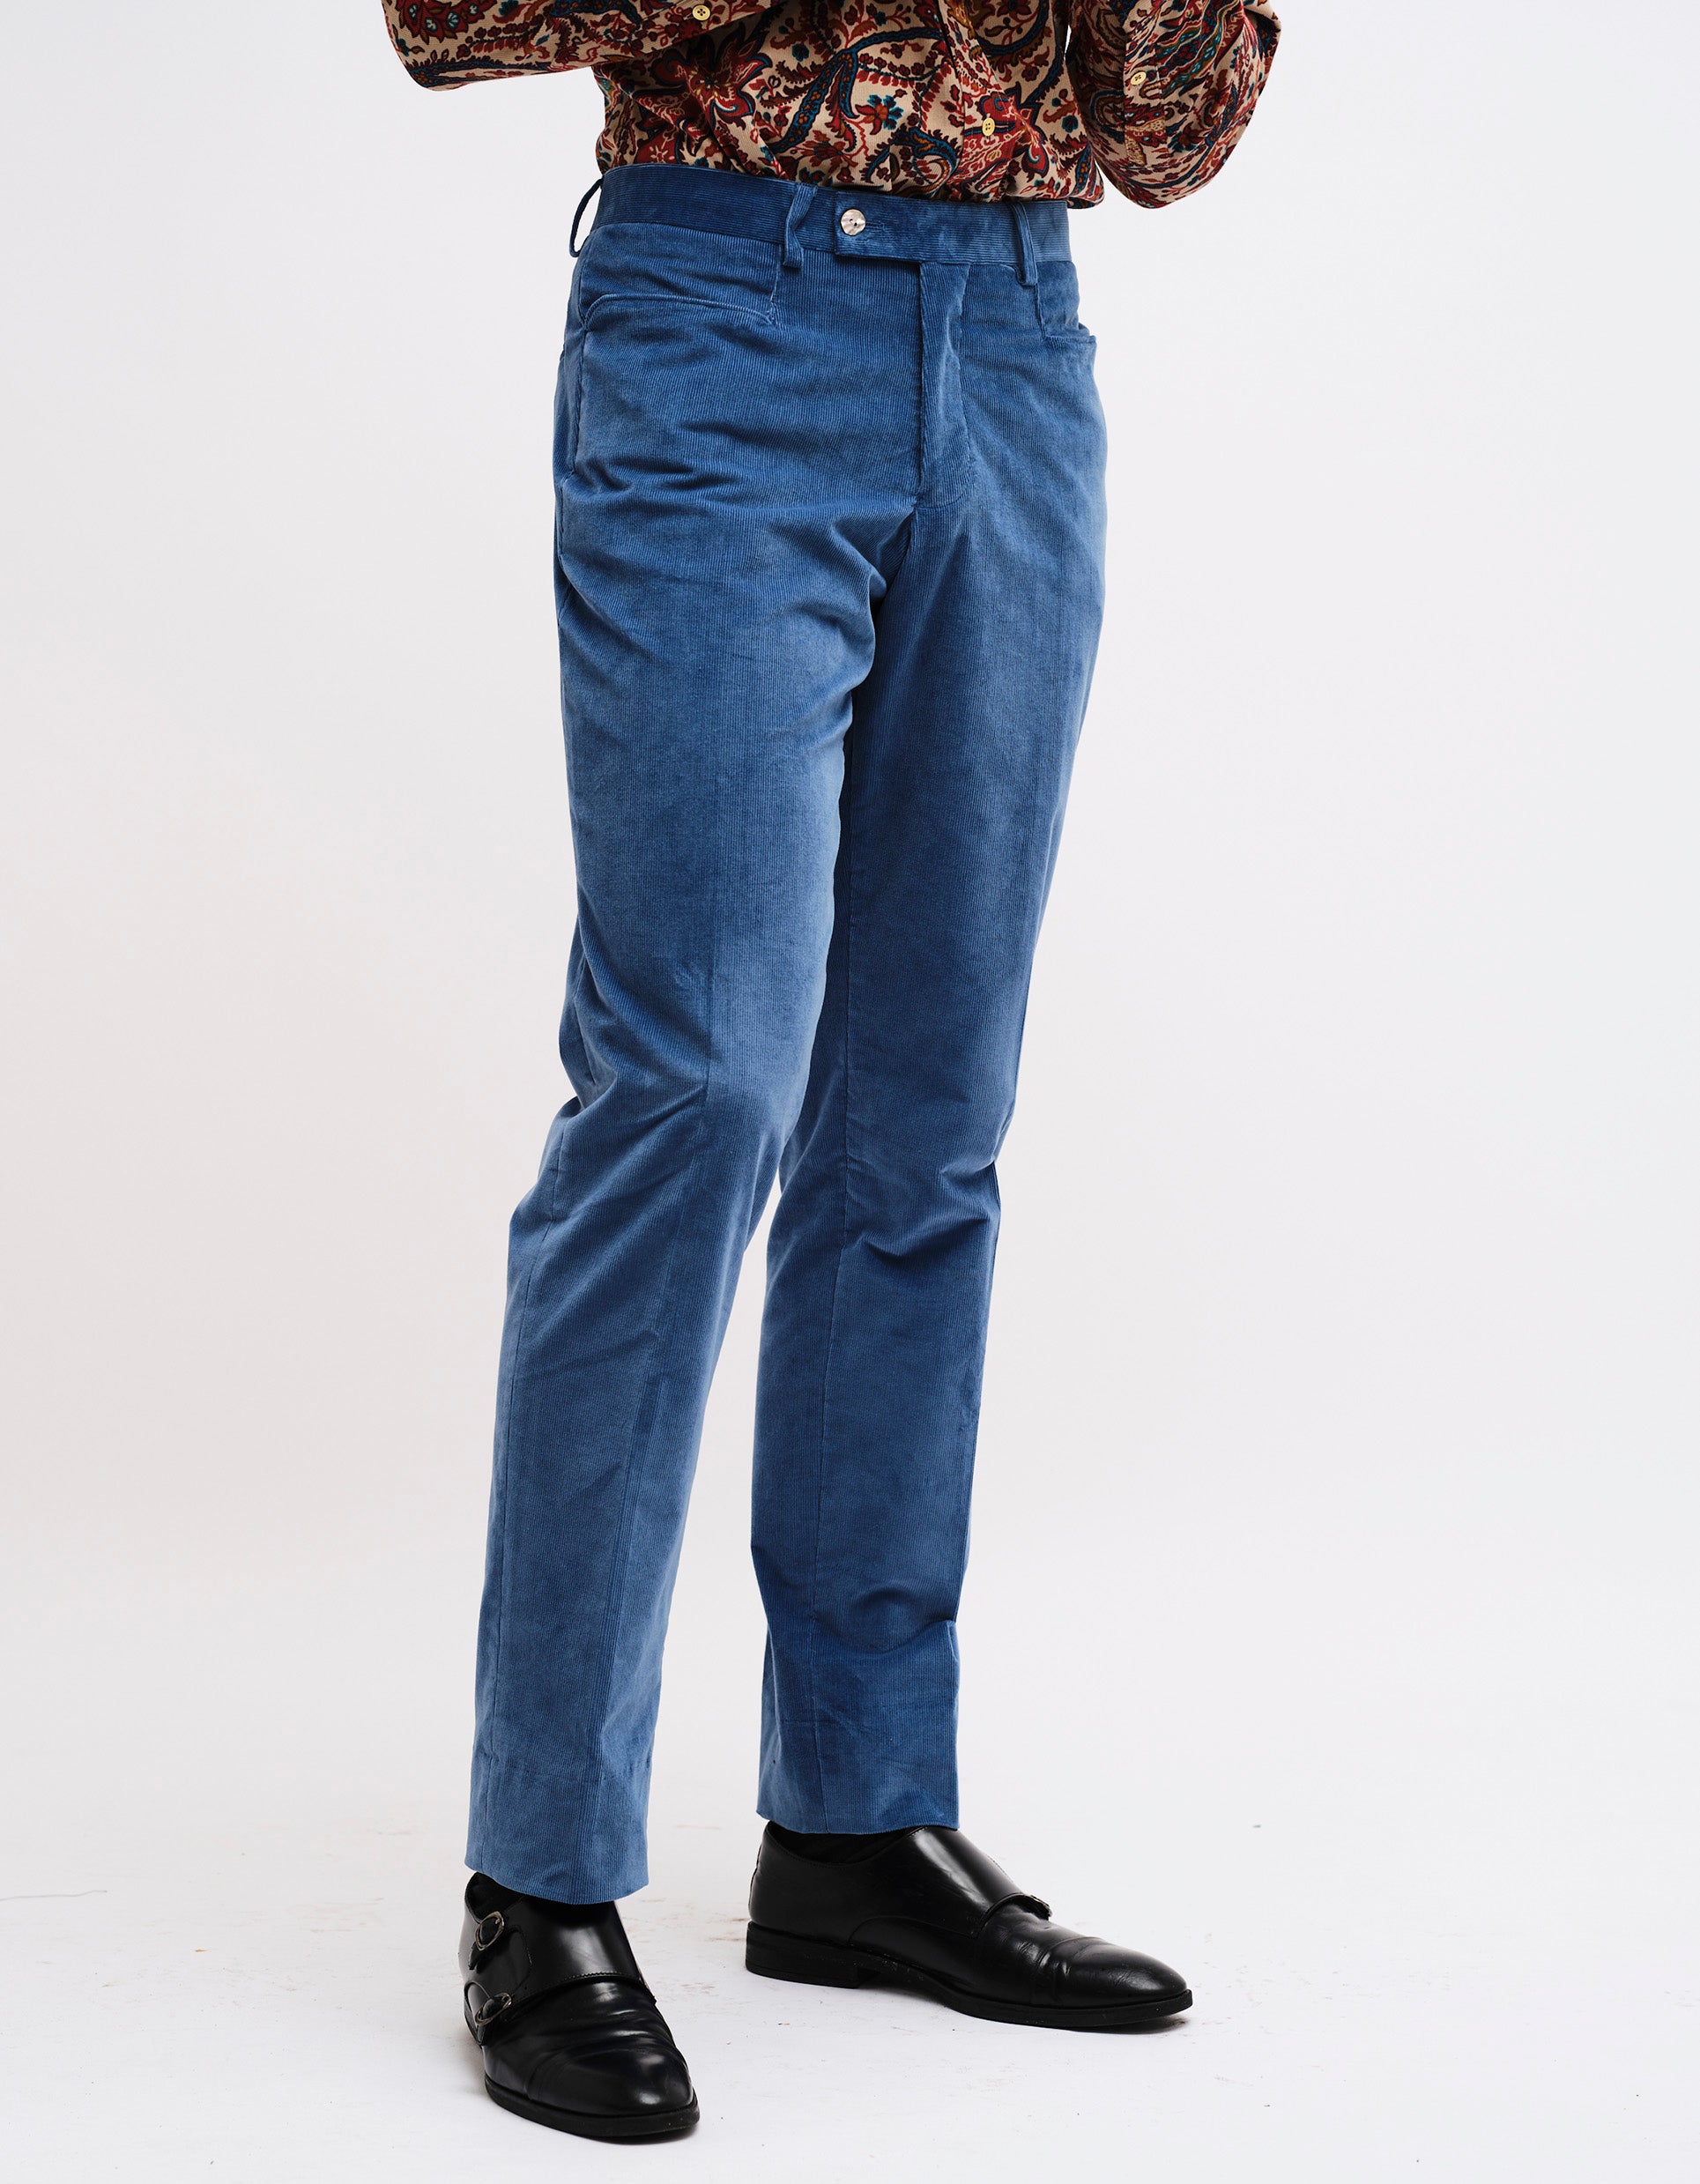 Infantry Blue Corduroy Trousers -Stancliffe Flat-Front in 8-Wale Cotton by  Fort Belvedere